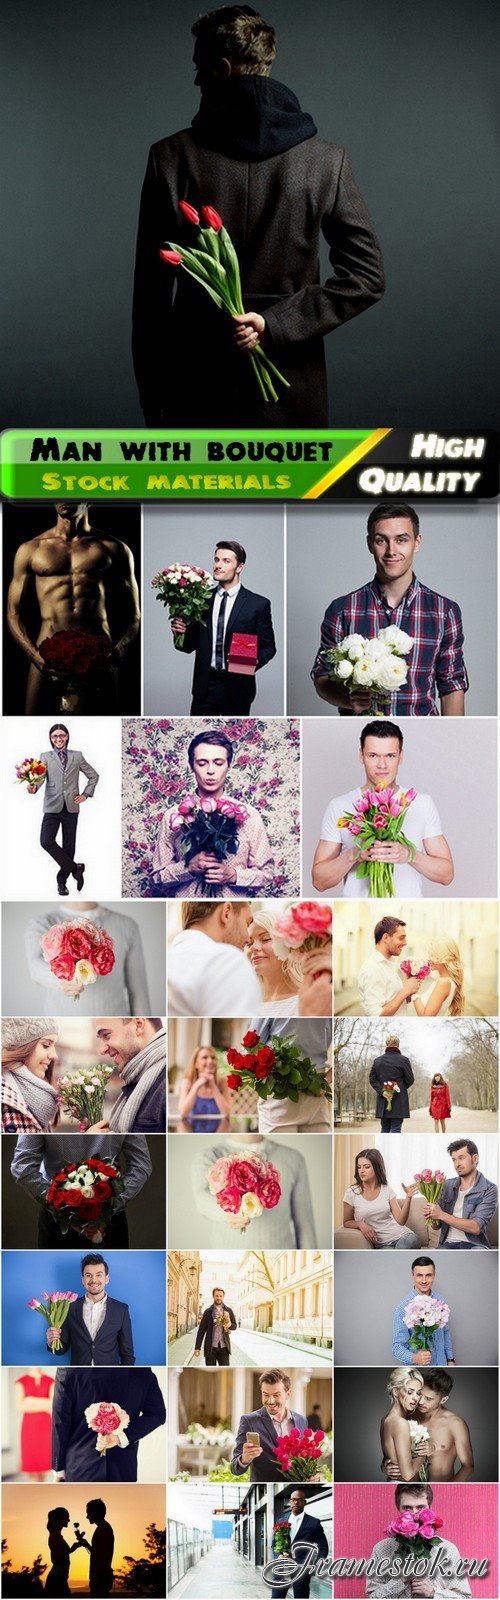 Men with a bouquet of flowers for favorite ladies - 25 HQ Jpg